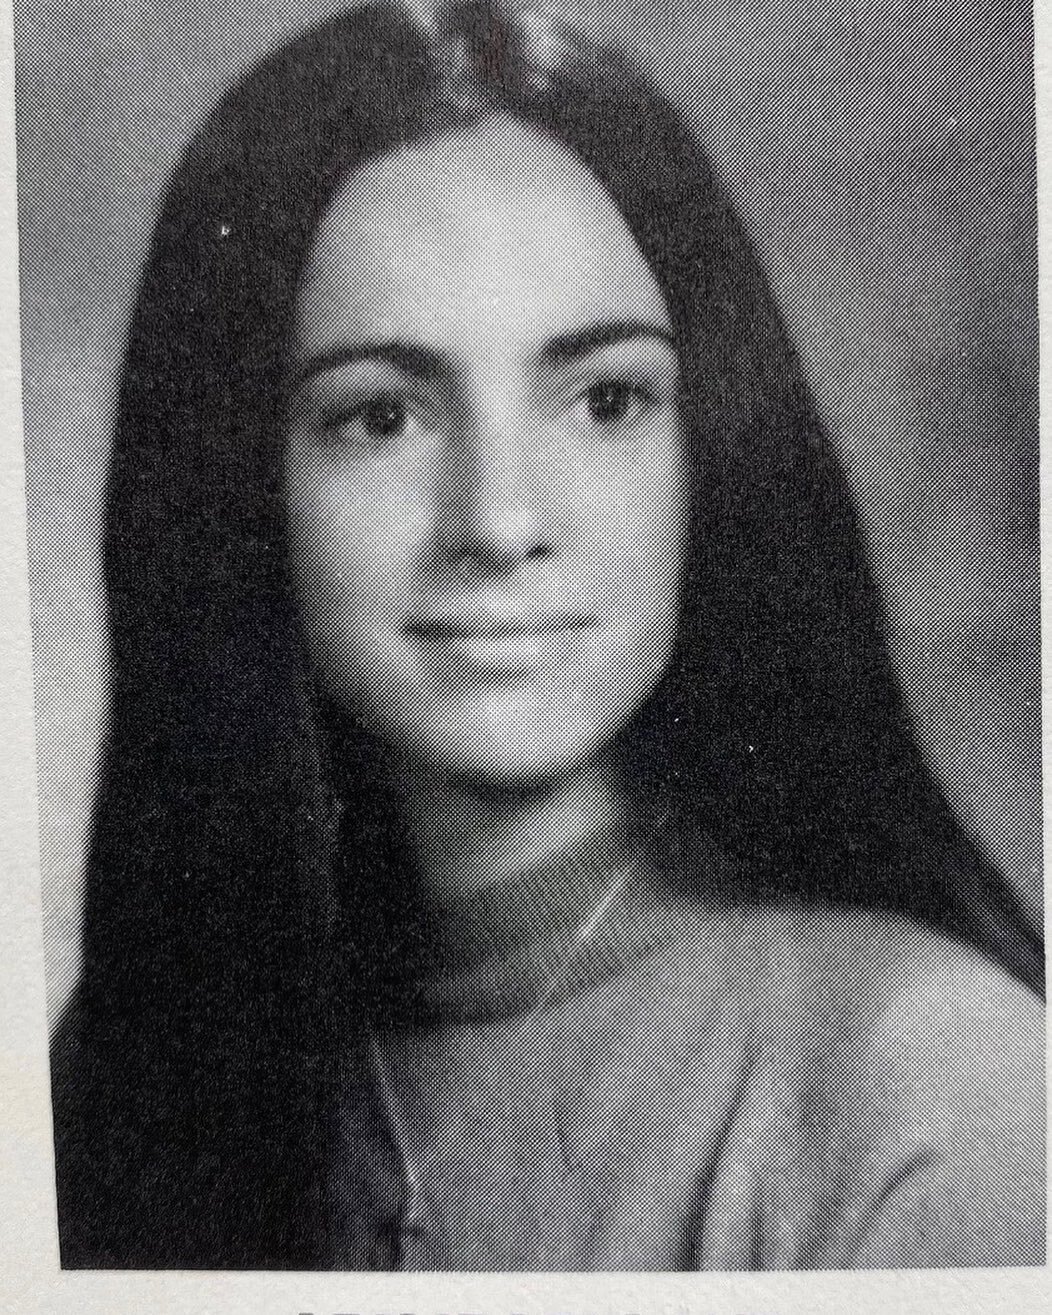 Highschool me! I looked through my old yearbook not too long ago. Wow. Wish I had written more from those crazy years. But it's never too late to start!